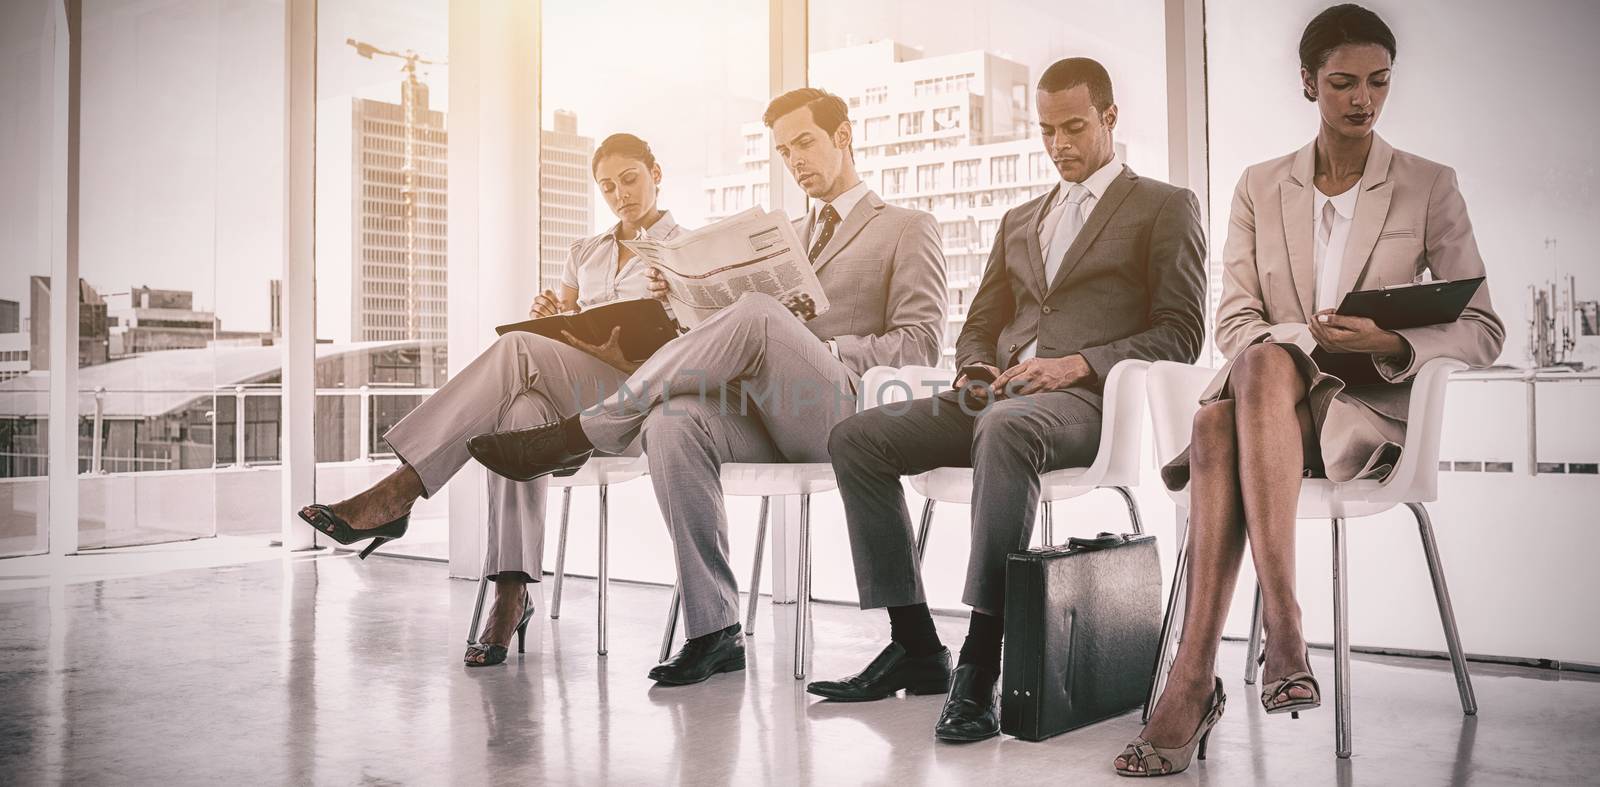 Well dressed business people sitting together by Wavebreakmedia